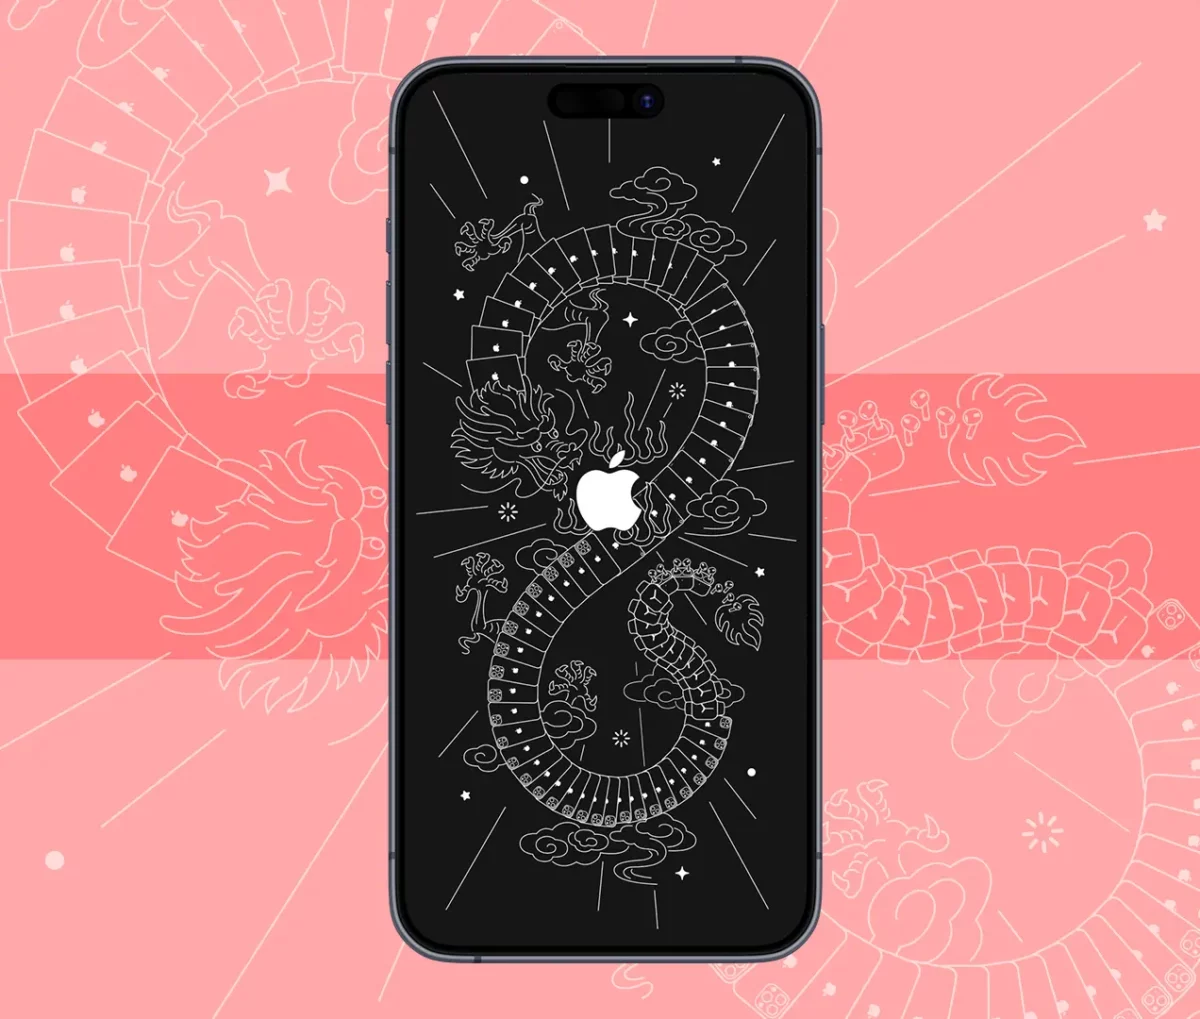 Apple Year Of The Dragon Black Wallpaper for iPhone